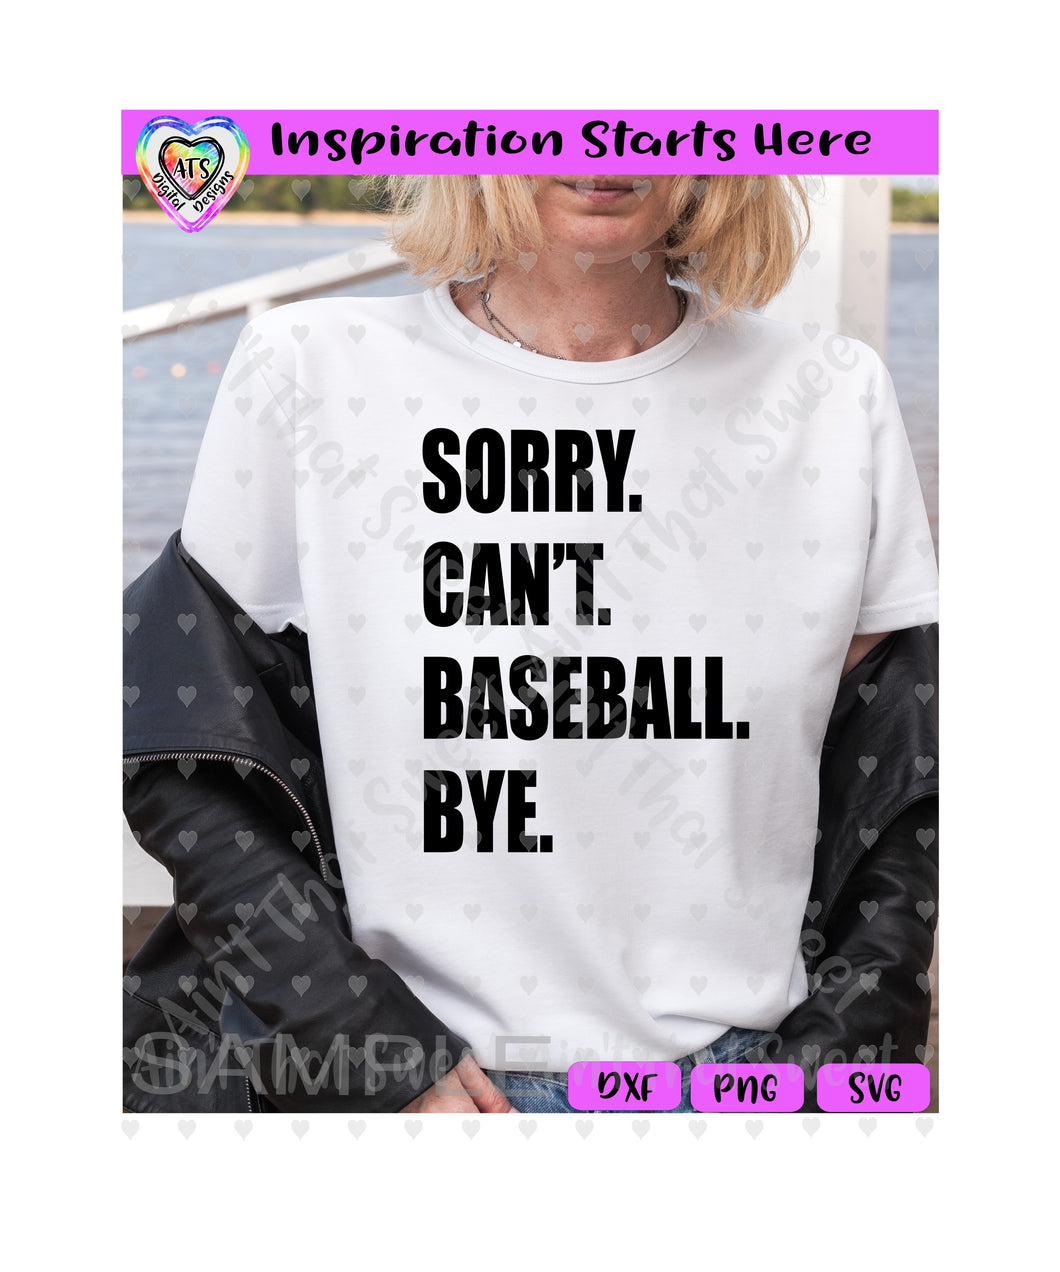 Sorry. Can't. Baseball. Bye - Transparent PNG SVG DXF - Silhouette, Cricut, ScanNCut